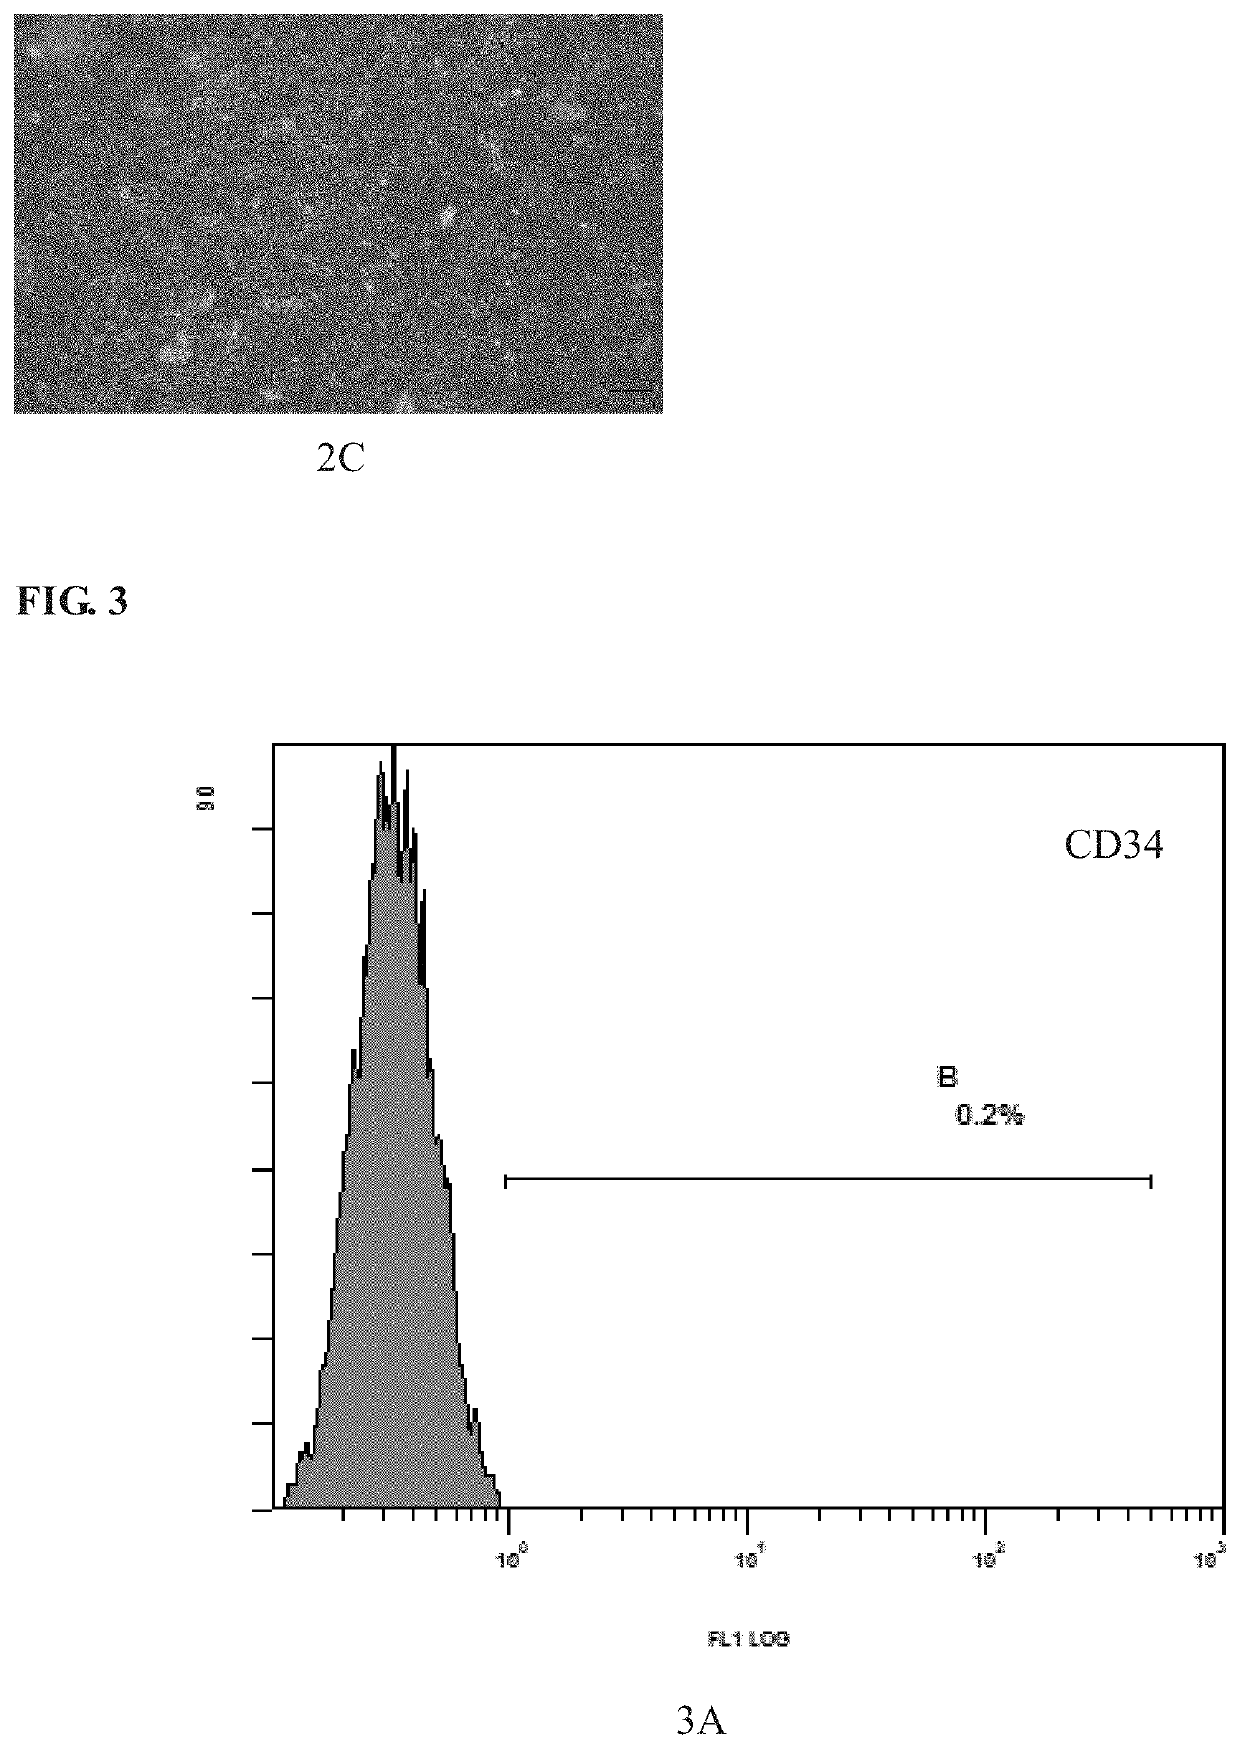 Method for separating and culturing mesenchymal stem cells from wharton's jelly tissue of umbilical cord